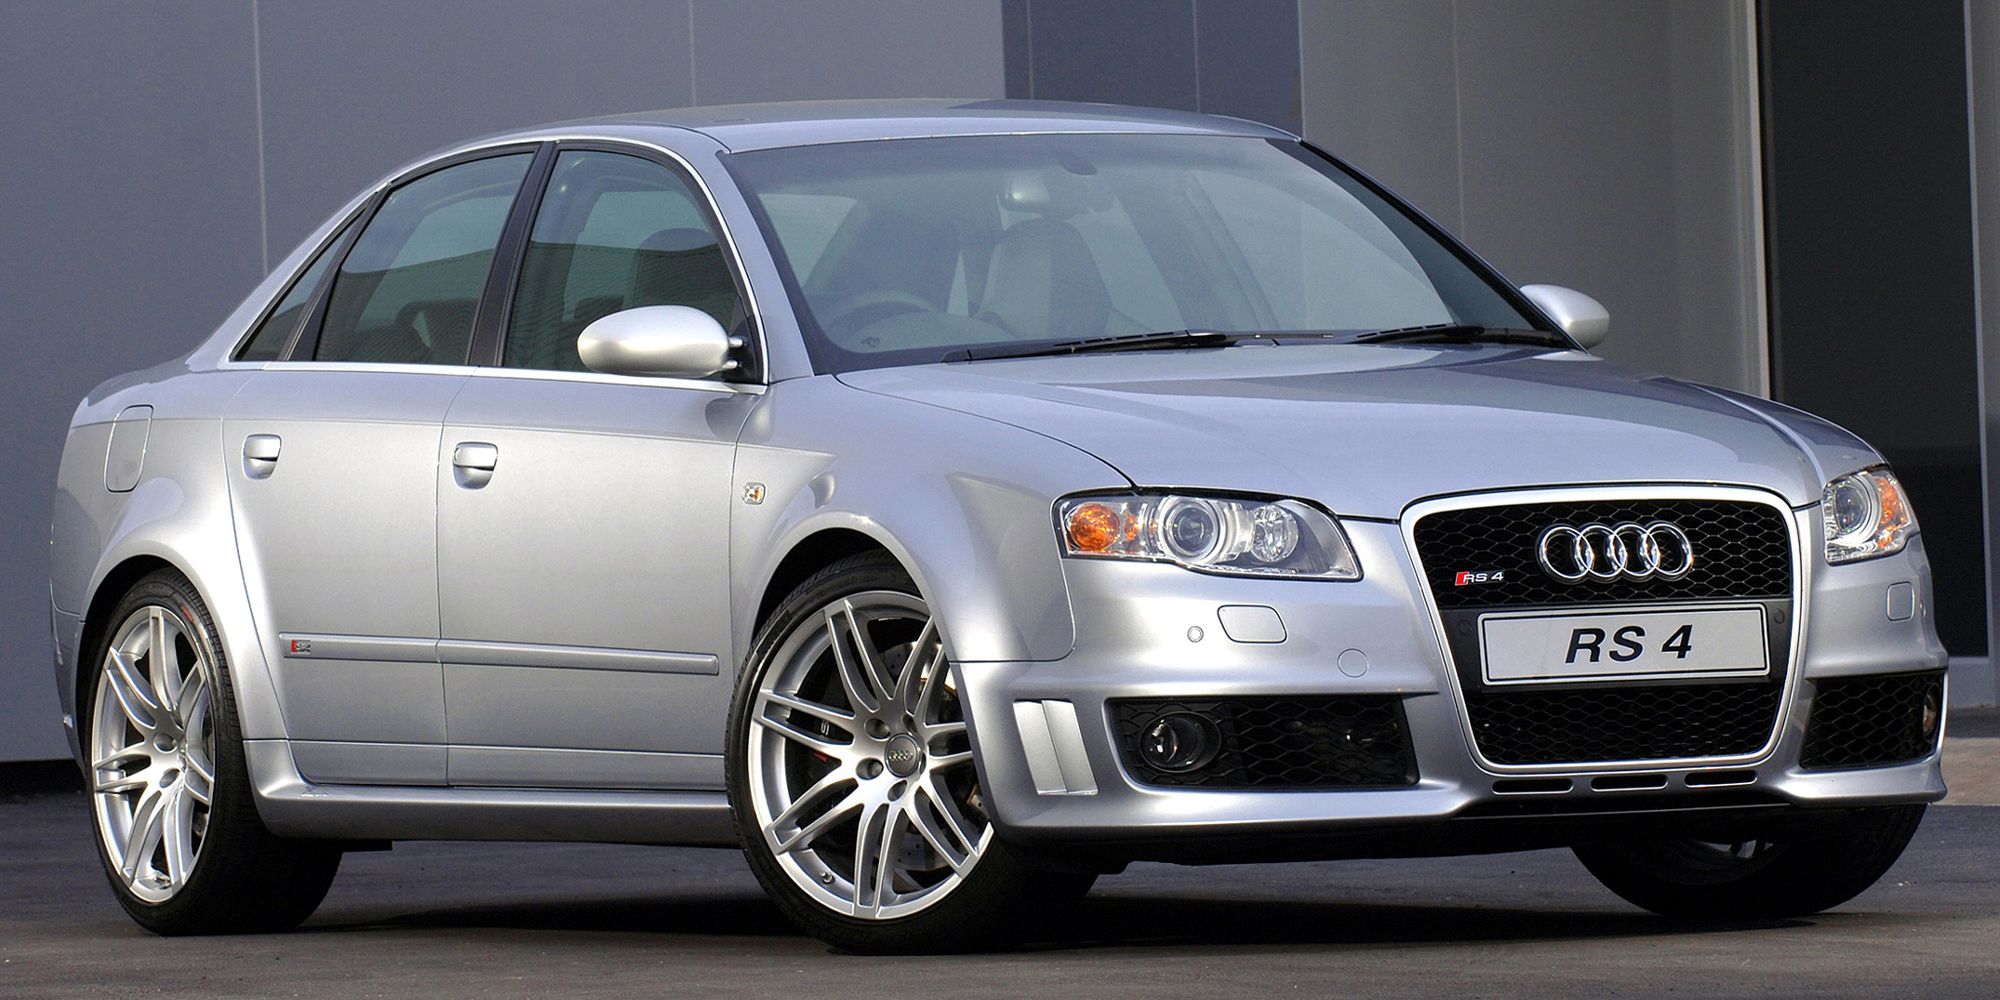 B7 RS4 front